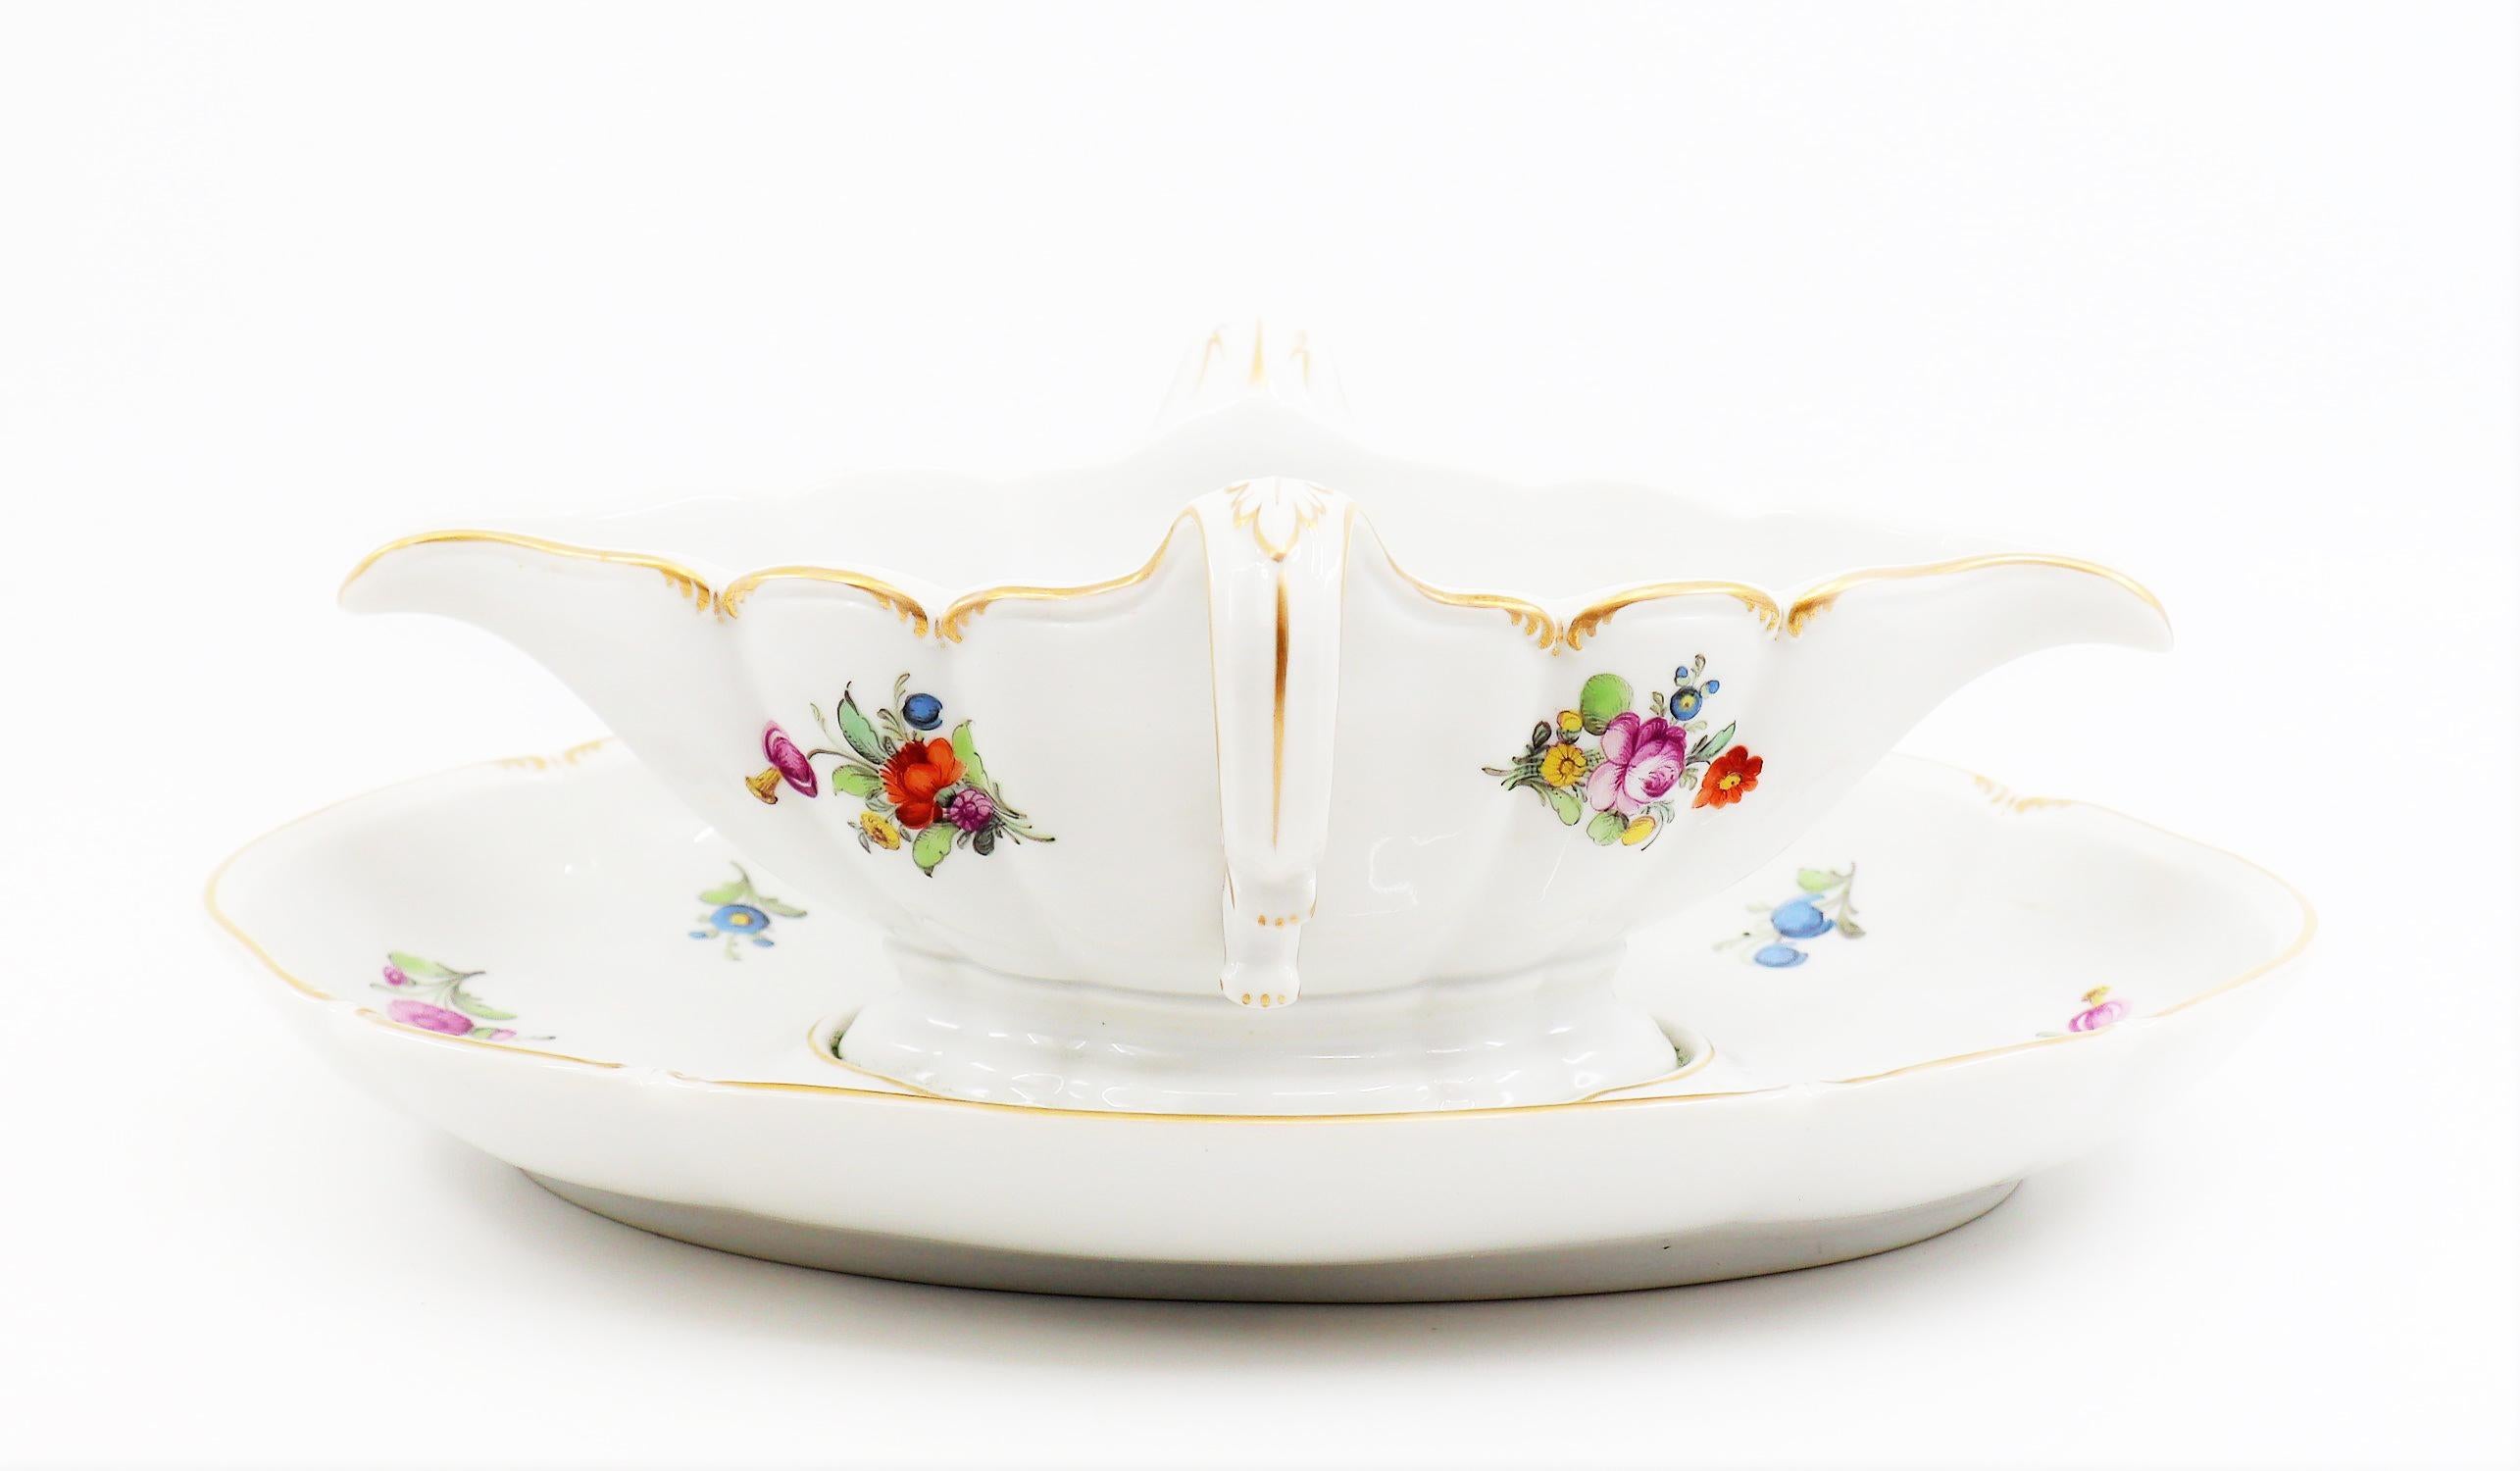 Dinner Service, 19th Century Porcelain, German, Hand Painted with Flowers Décor 7